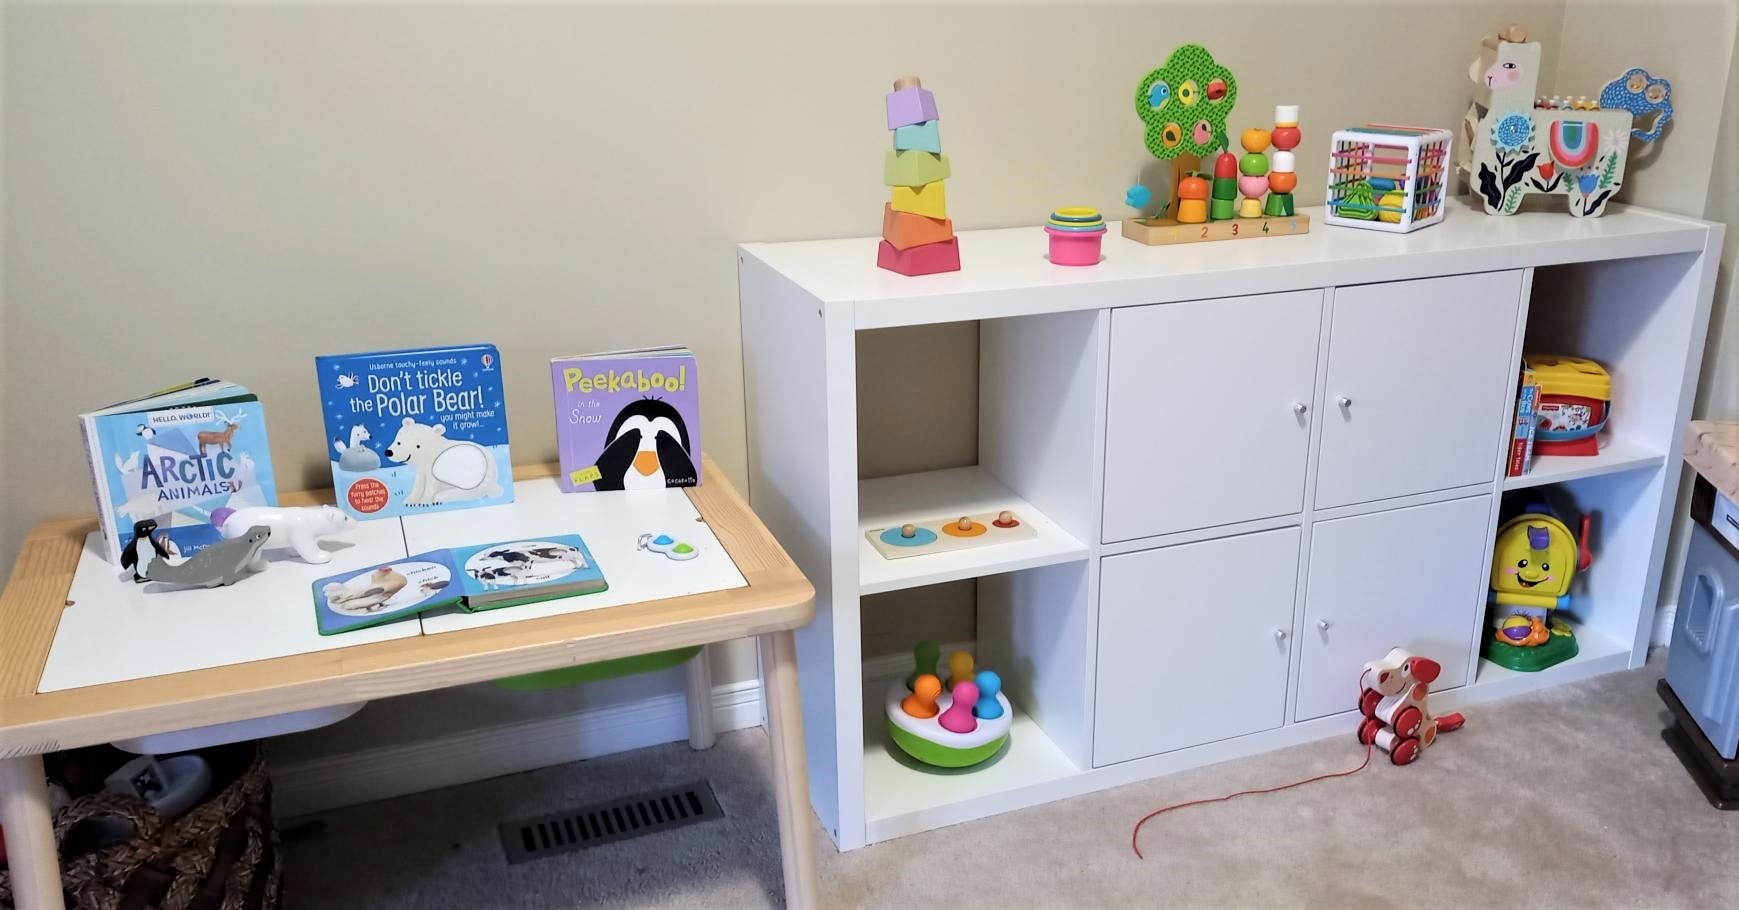 Why Is My Child Bored With Their Toys? The Benefits of Toy Rotation